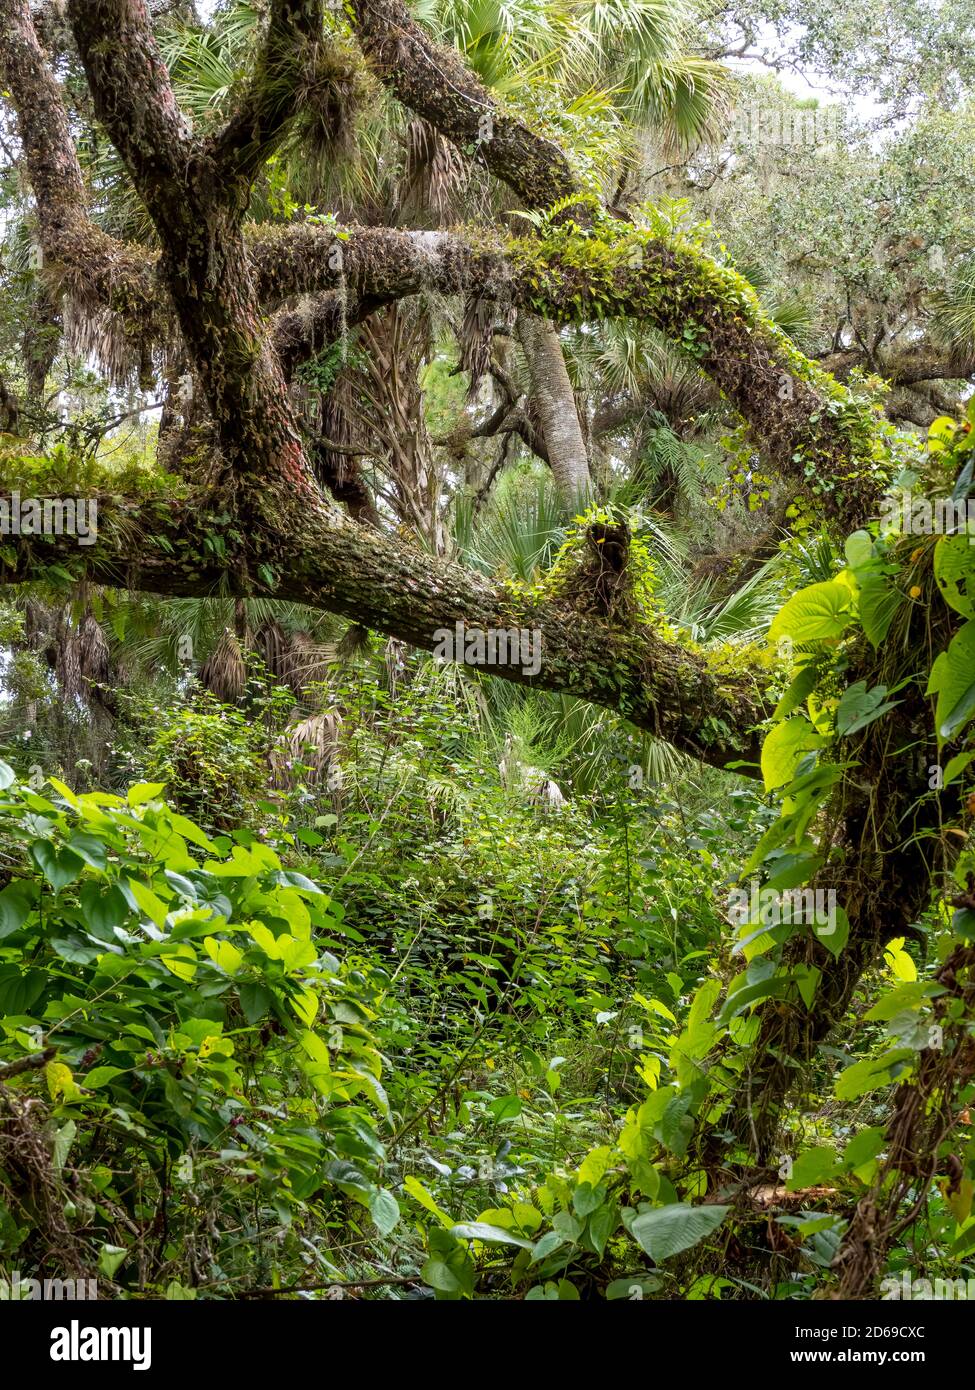 Lush green tropical forest in southwestern Florida in the United States Stock Photo